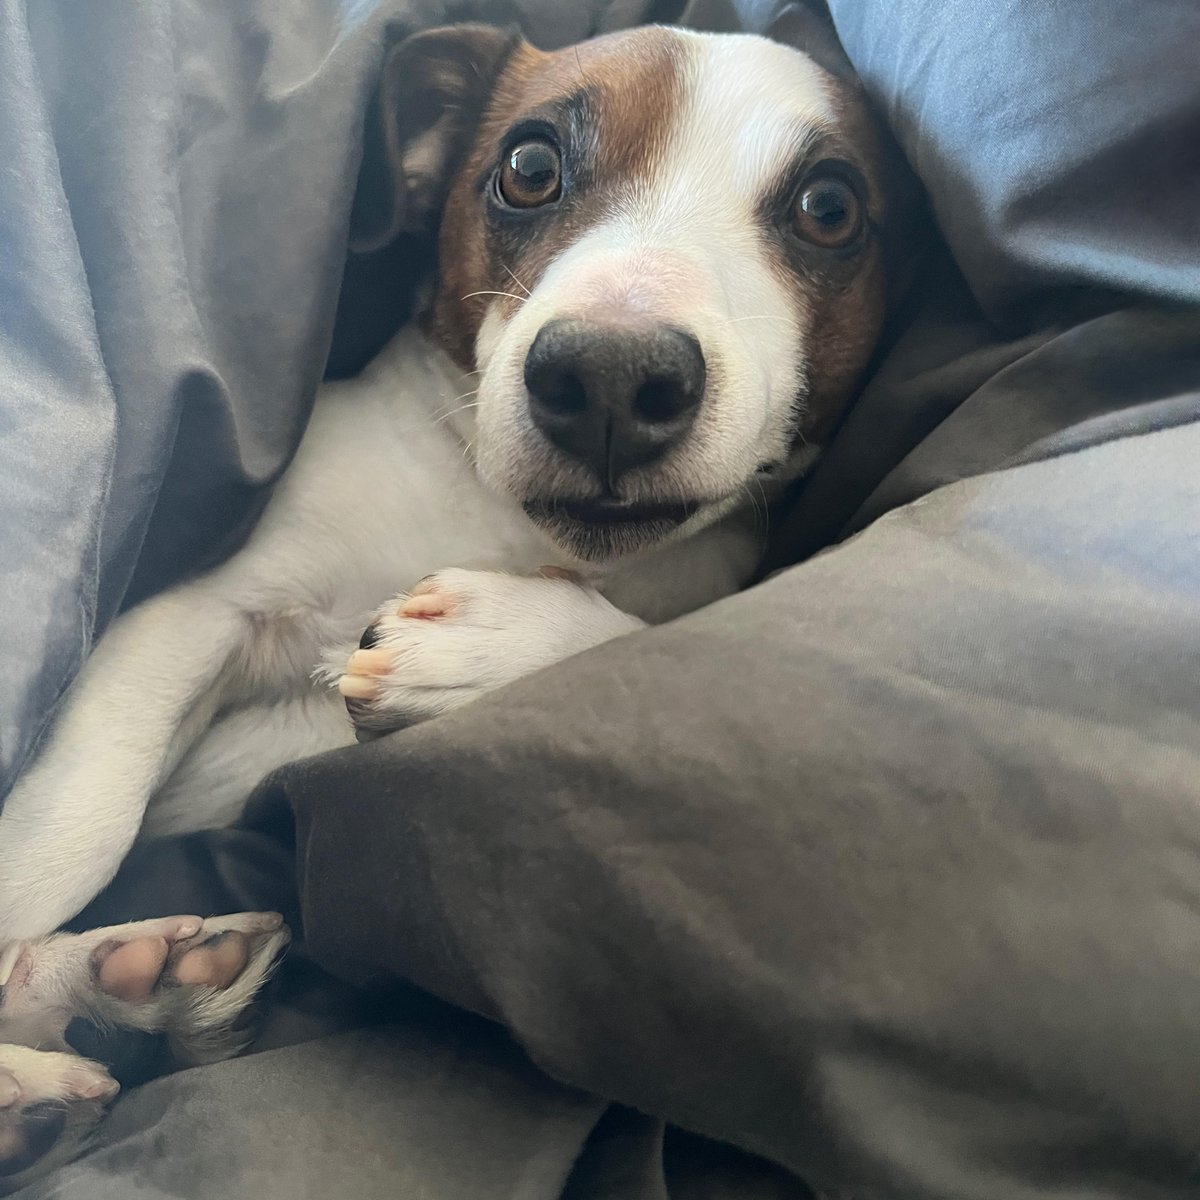 When you’re not a morning dog but the ring time is at 7am

#dogfriendlynyc #dogsofnyc #jackrussellnation #nyc
#9gag #barked #animalsdoingthings #jrt #jackrusselldog #astro #dogs #dog  #cute #cuteness #cutenessoverload #doggo #doglovers #doglove #doglife #happydog #dogphotography